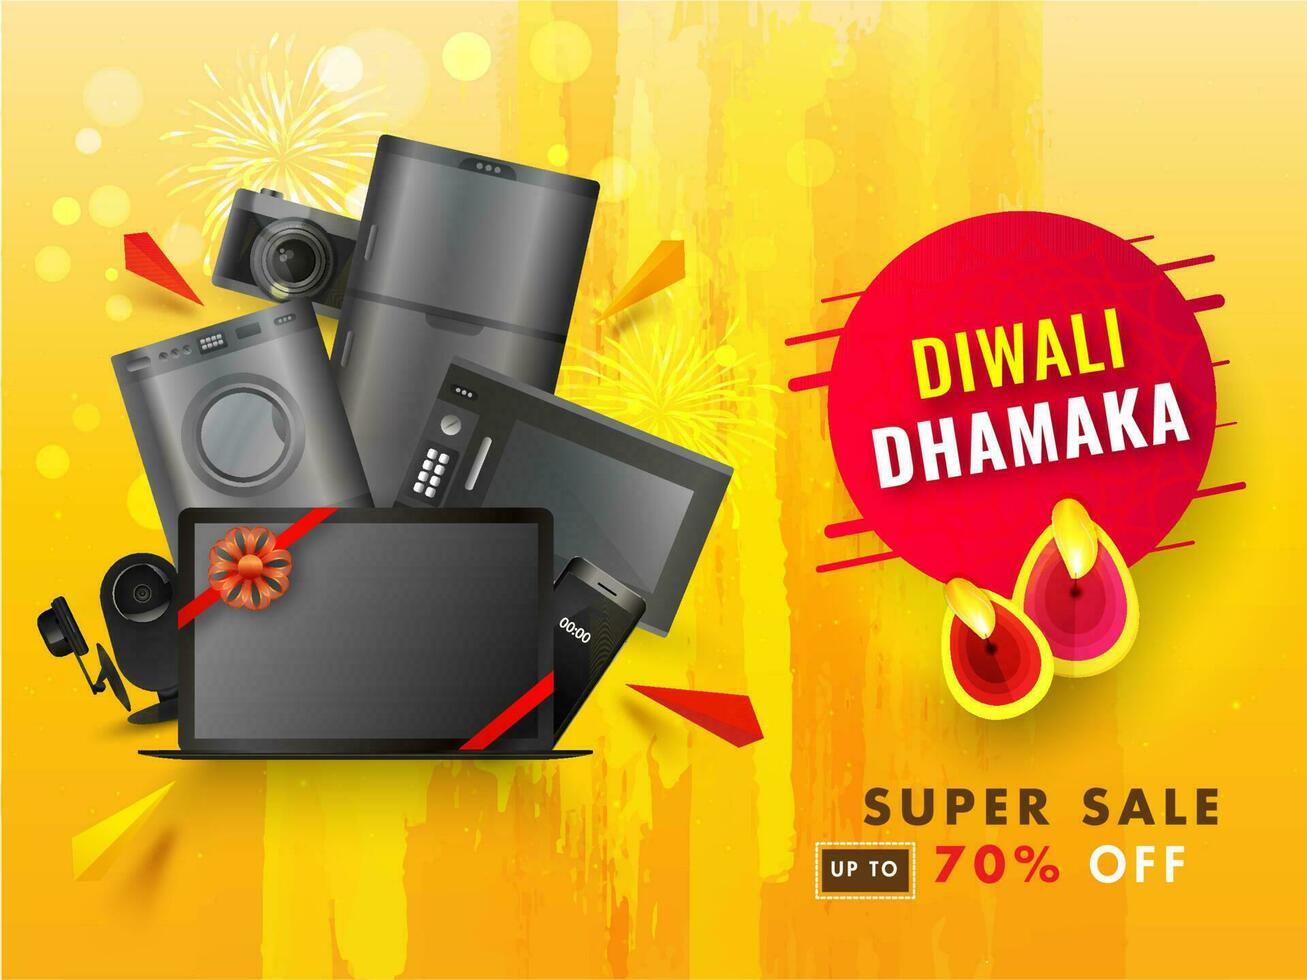 Home appliance electronic sale banner or poster design with illuminated oil lamp and 70 discount offer on abstract background for Diwali Dhamaka. vector